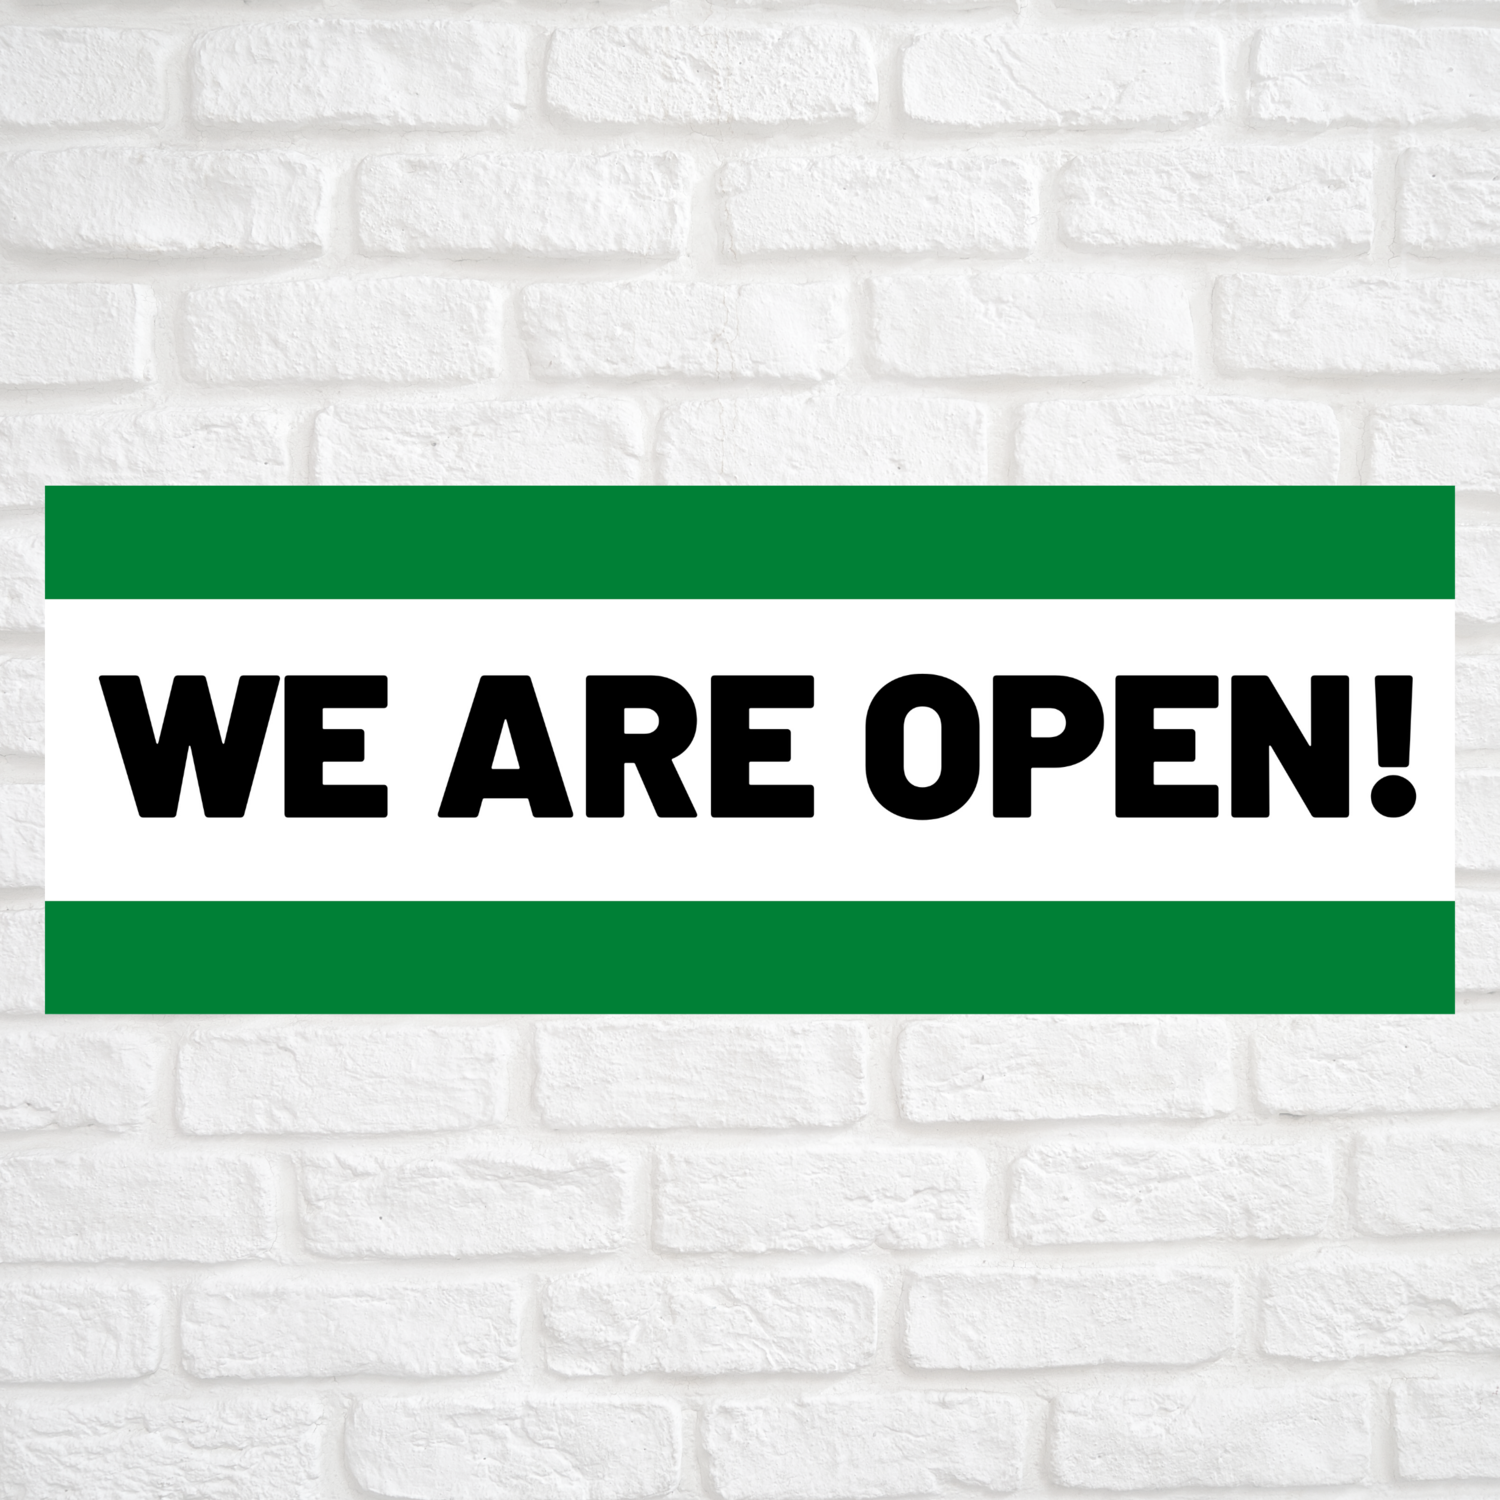 We Are Open! Green/Green